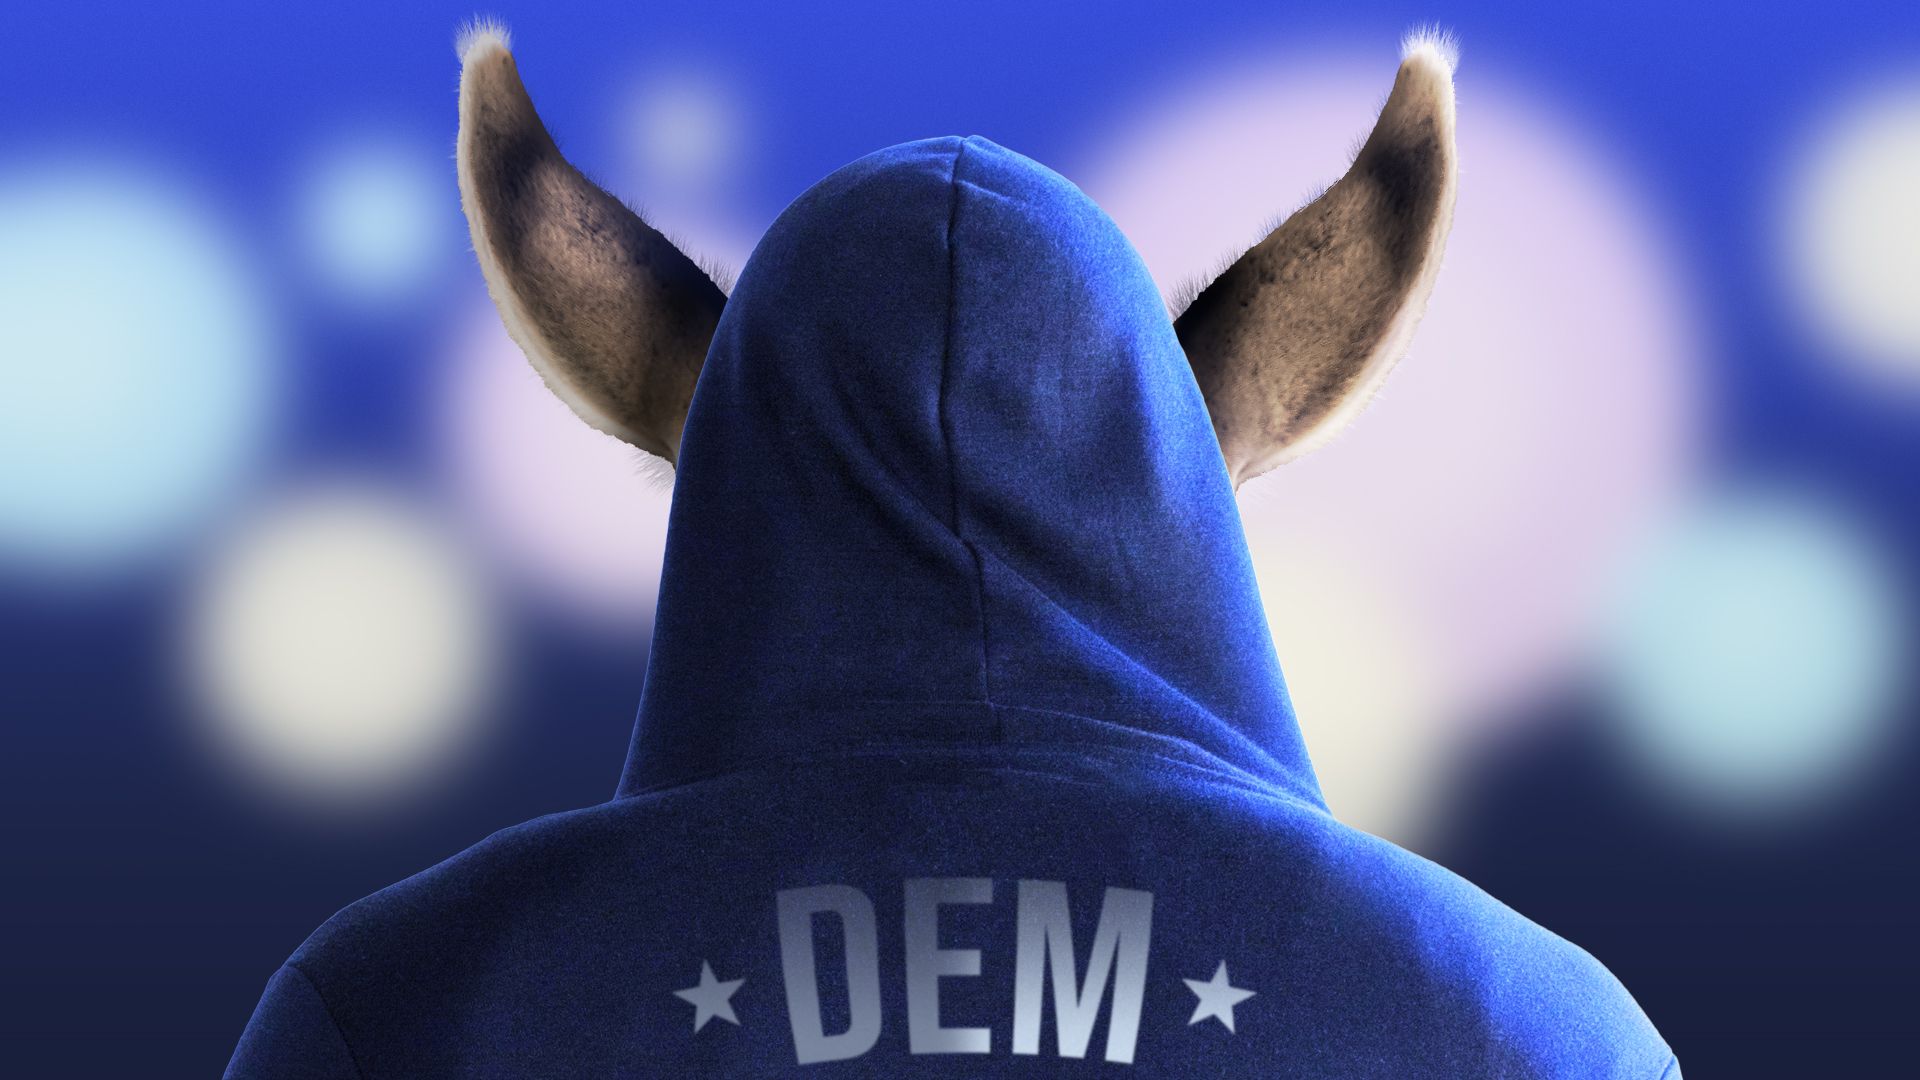 Illustration of a donkey in a boxing robe with the word "dem" on the back